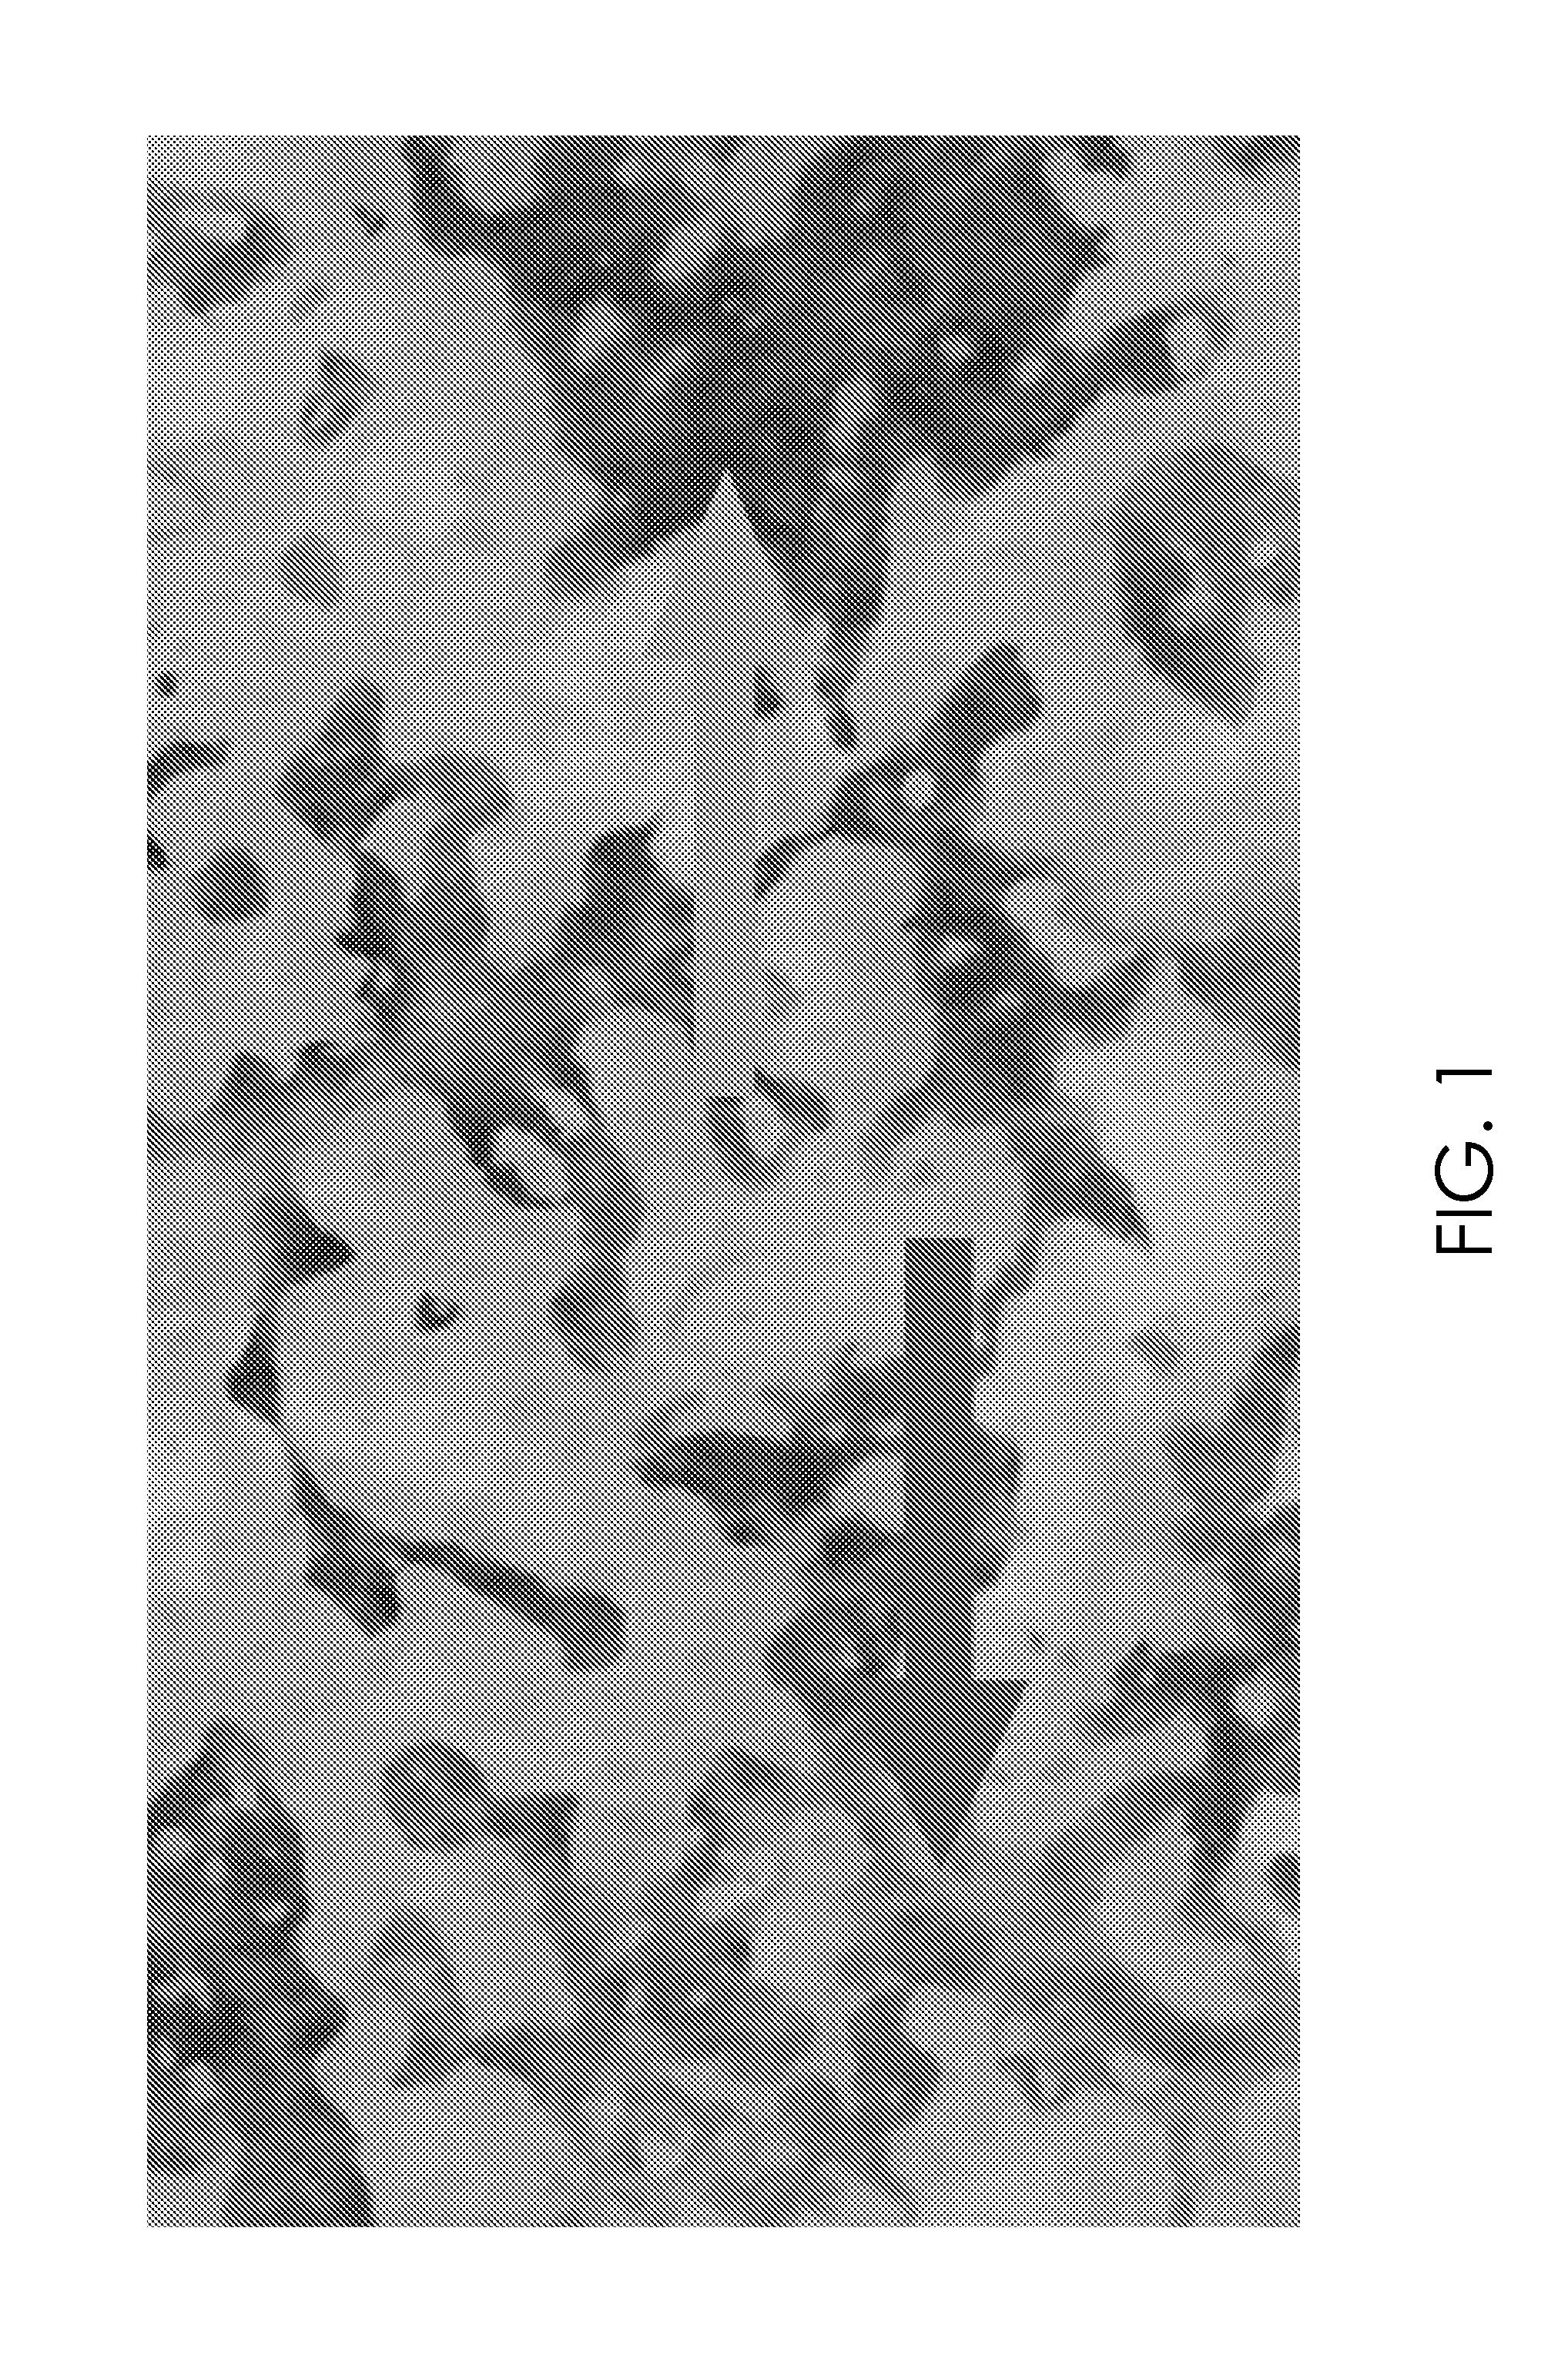 Methods of Culturing Retinal Pigmented Epithelium Cells, Including Xeno-Free Production, RPE Enrichment, and Cryopreservation